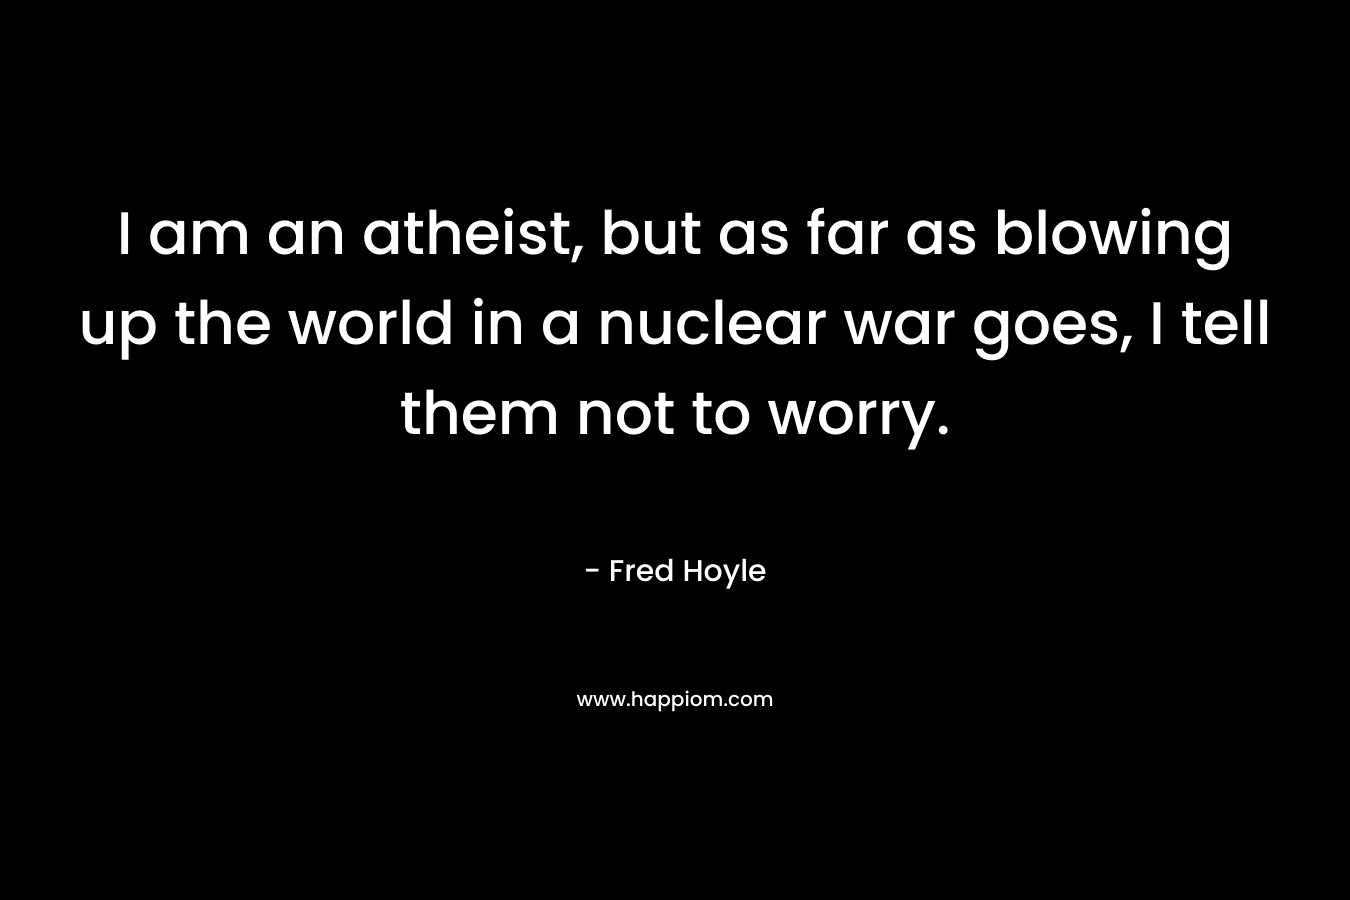 I am an atheist, but as far as blowing up the world in a nuclear war goes, I tell them not to worry. – Fred Hoyle